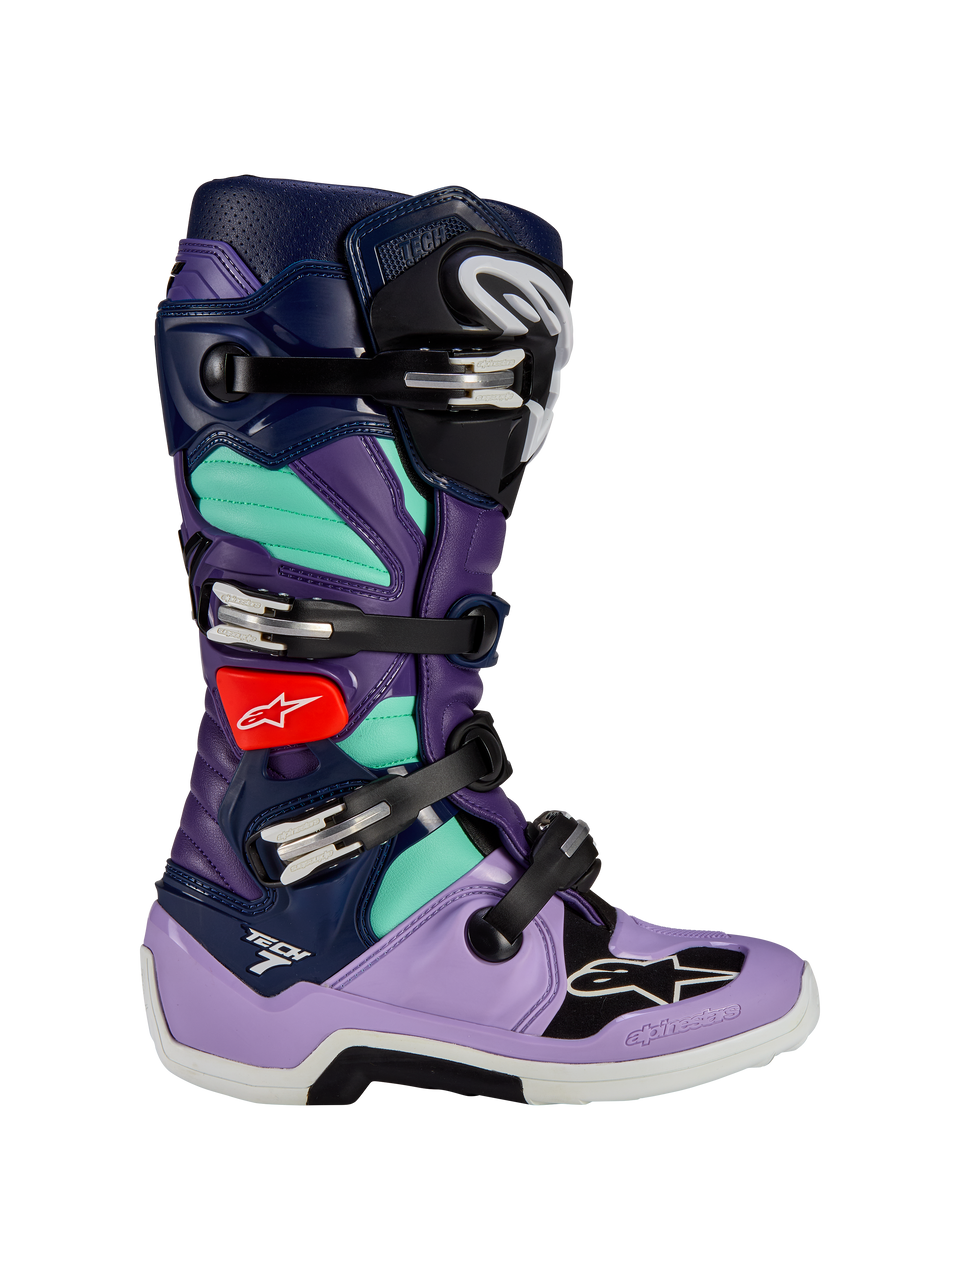 Limited Edition Imperial Tech 7 Boot